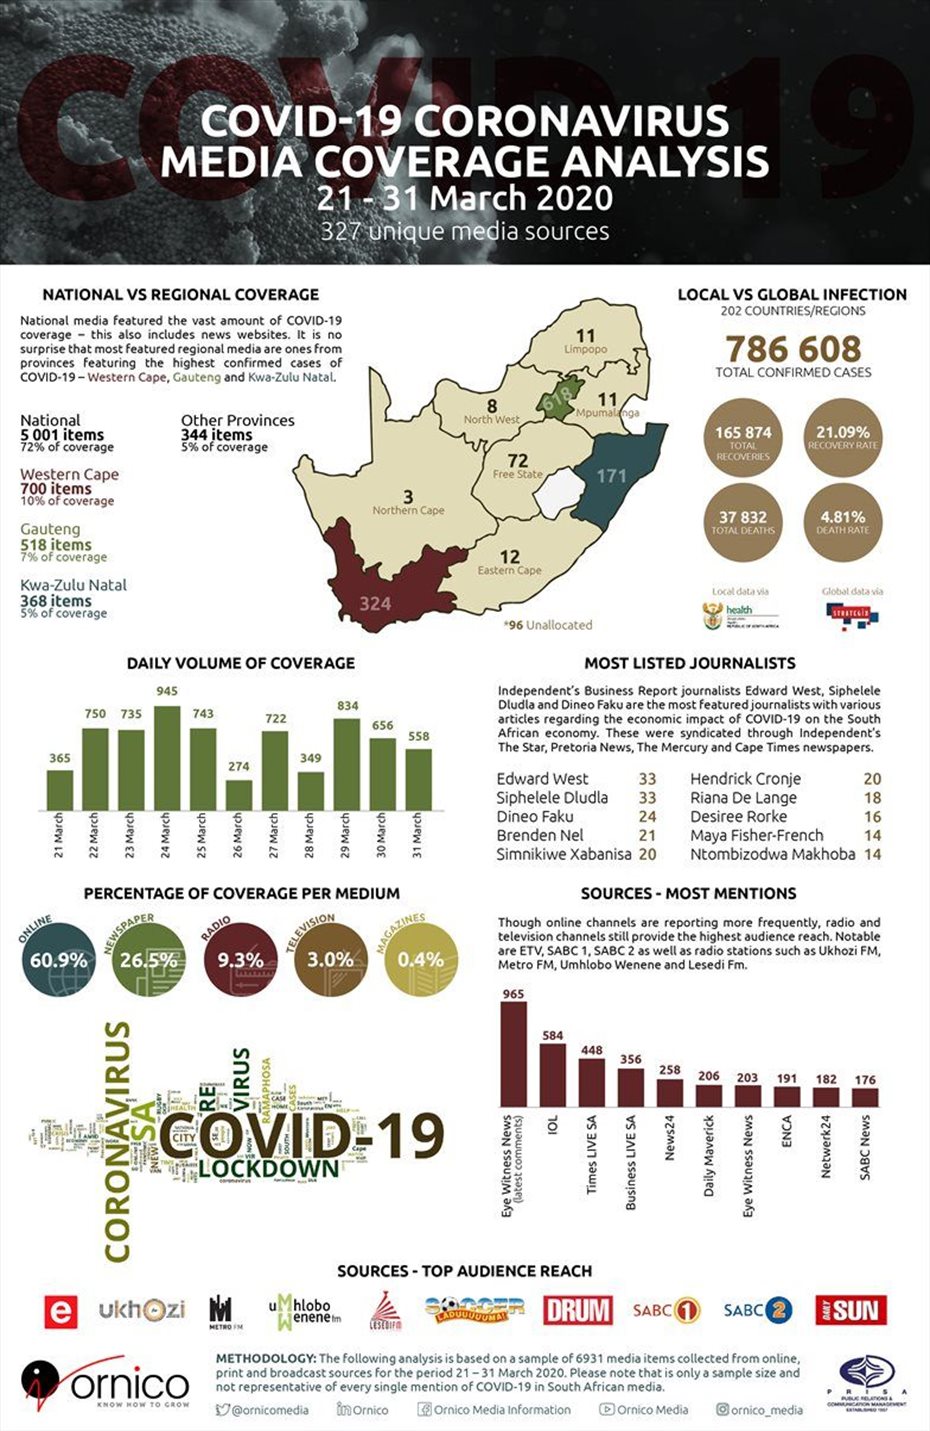 Covid-19 dominates the media in South Africa